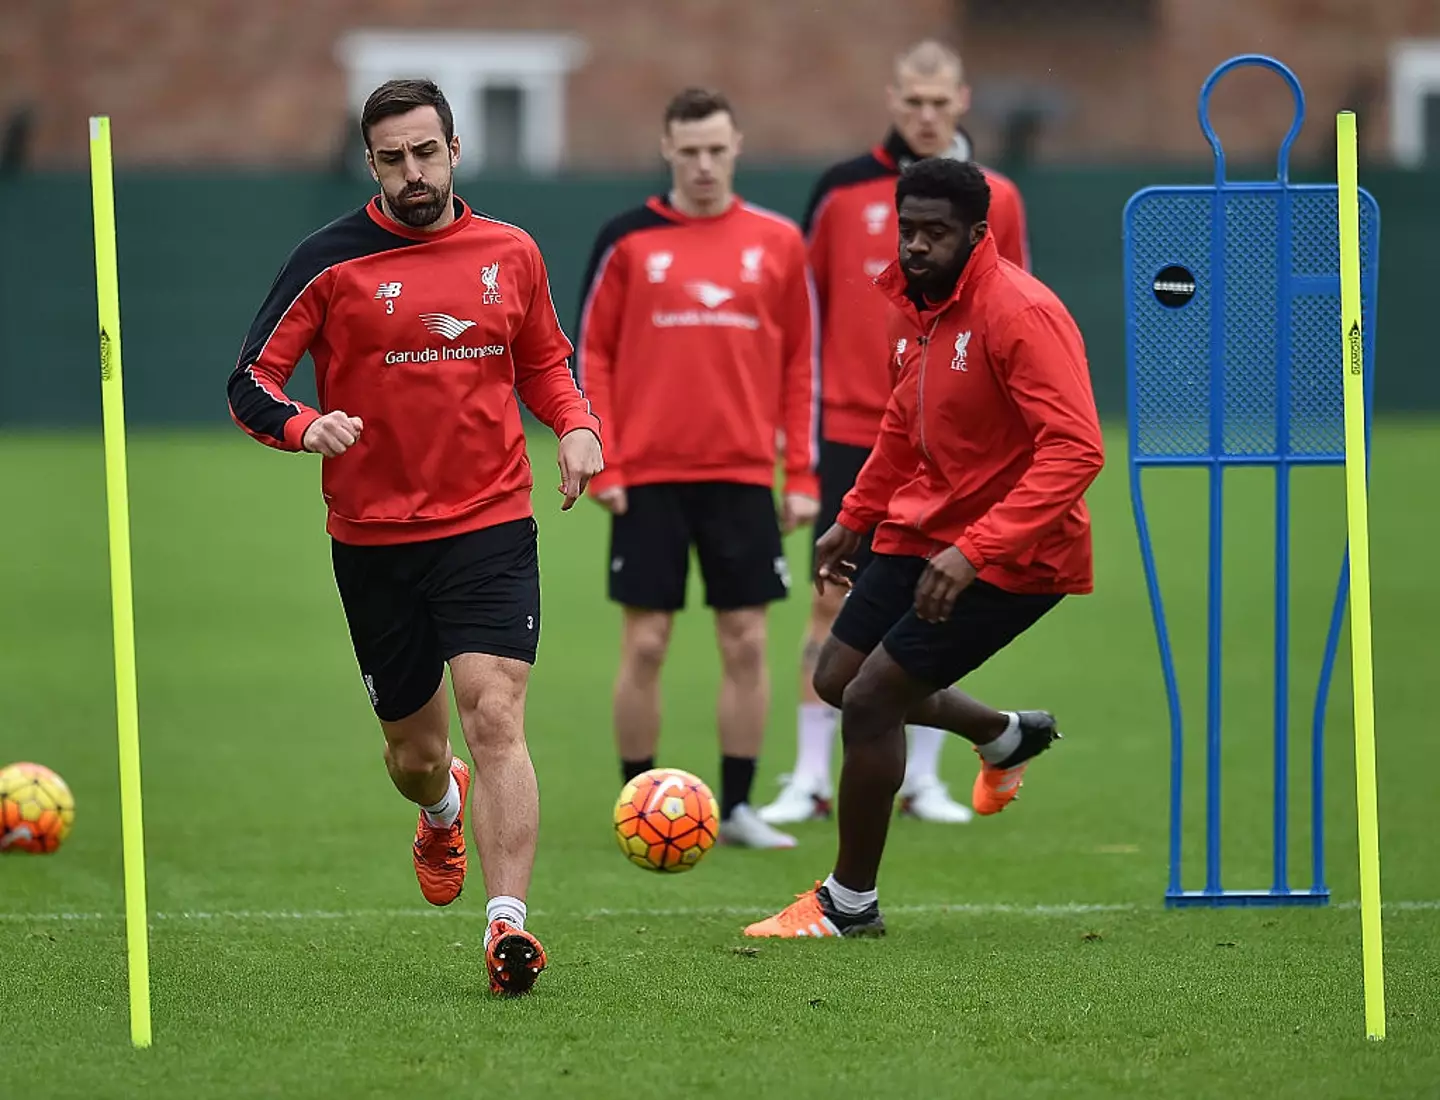 Enrique training with Liverpool in 2015